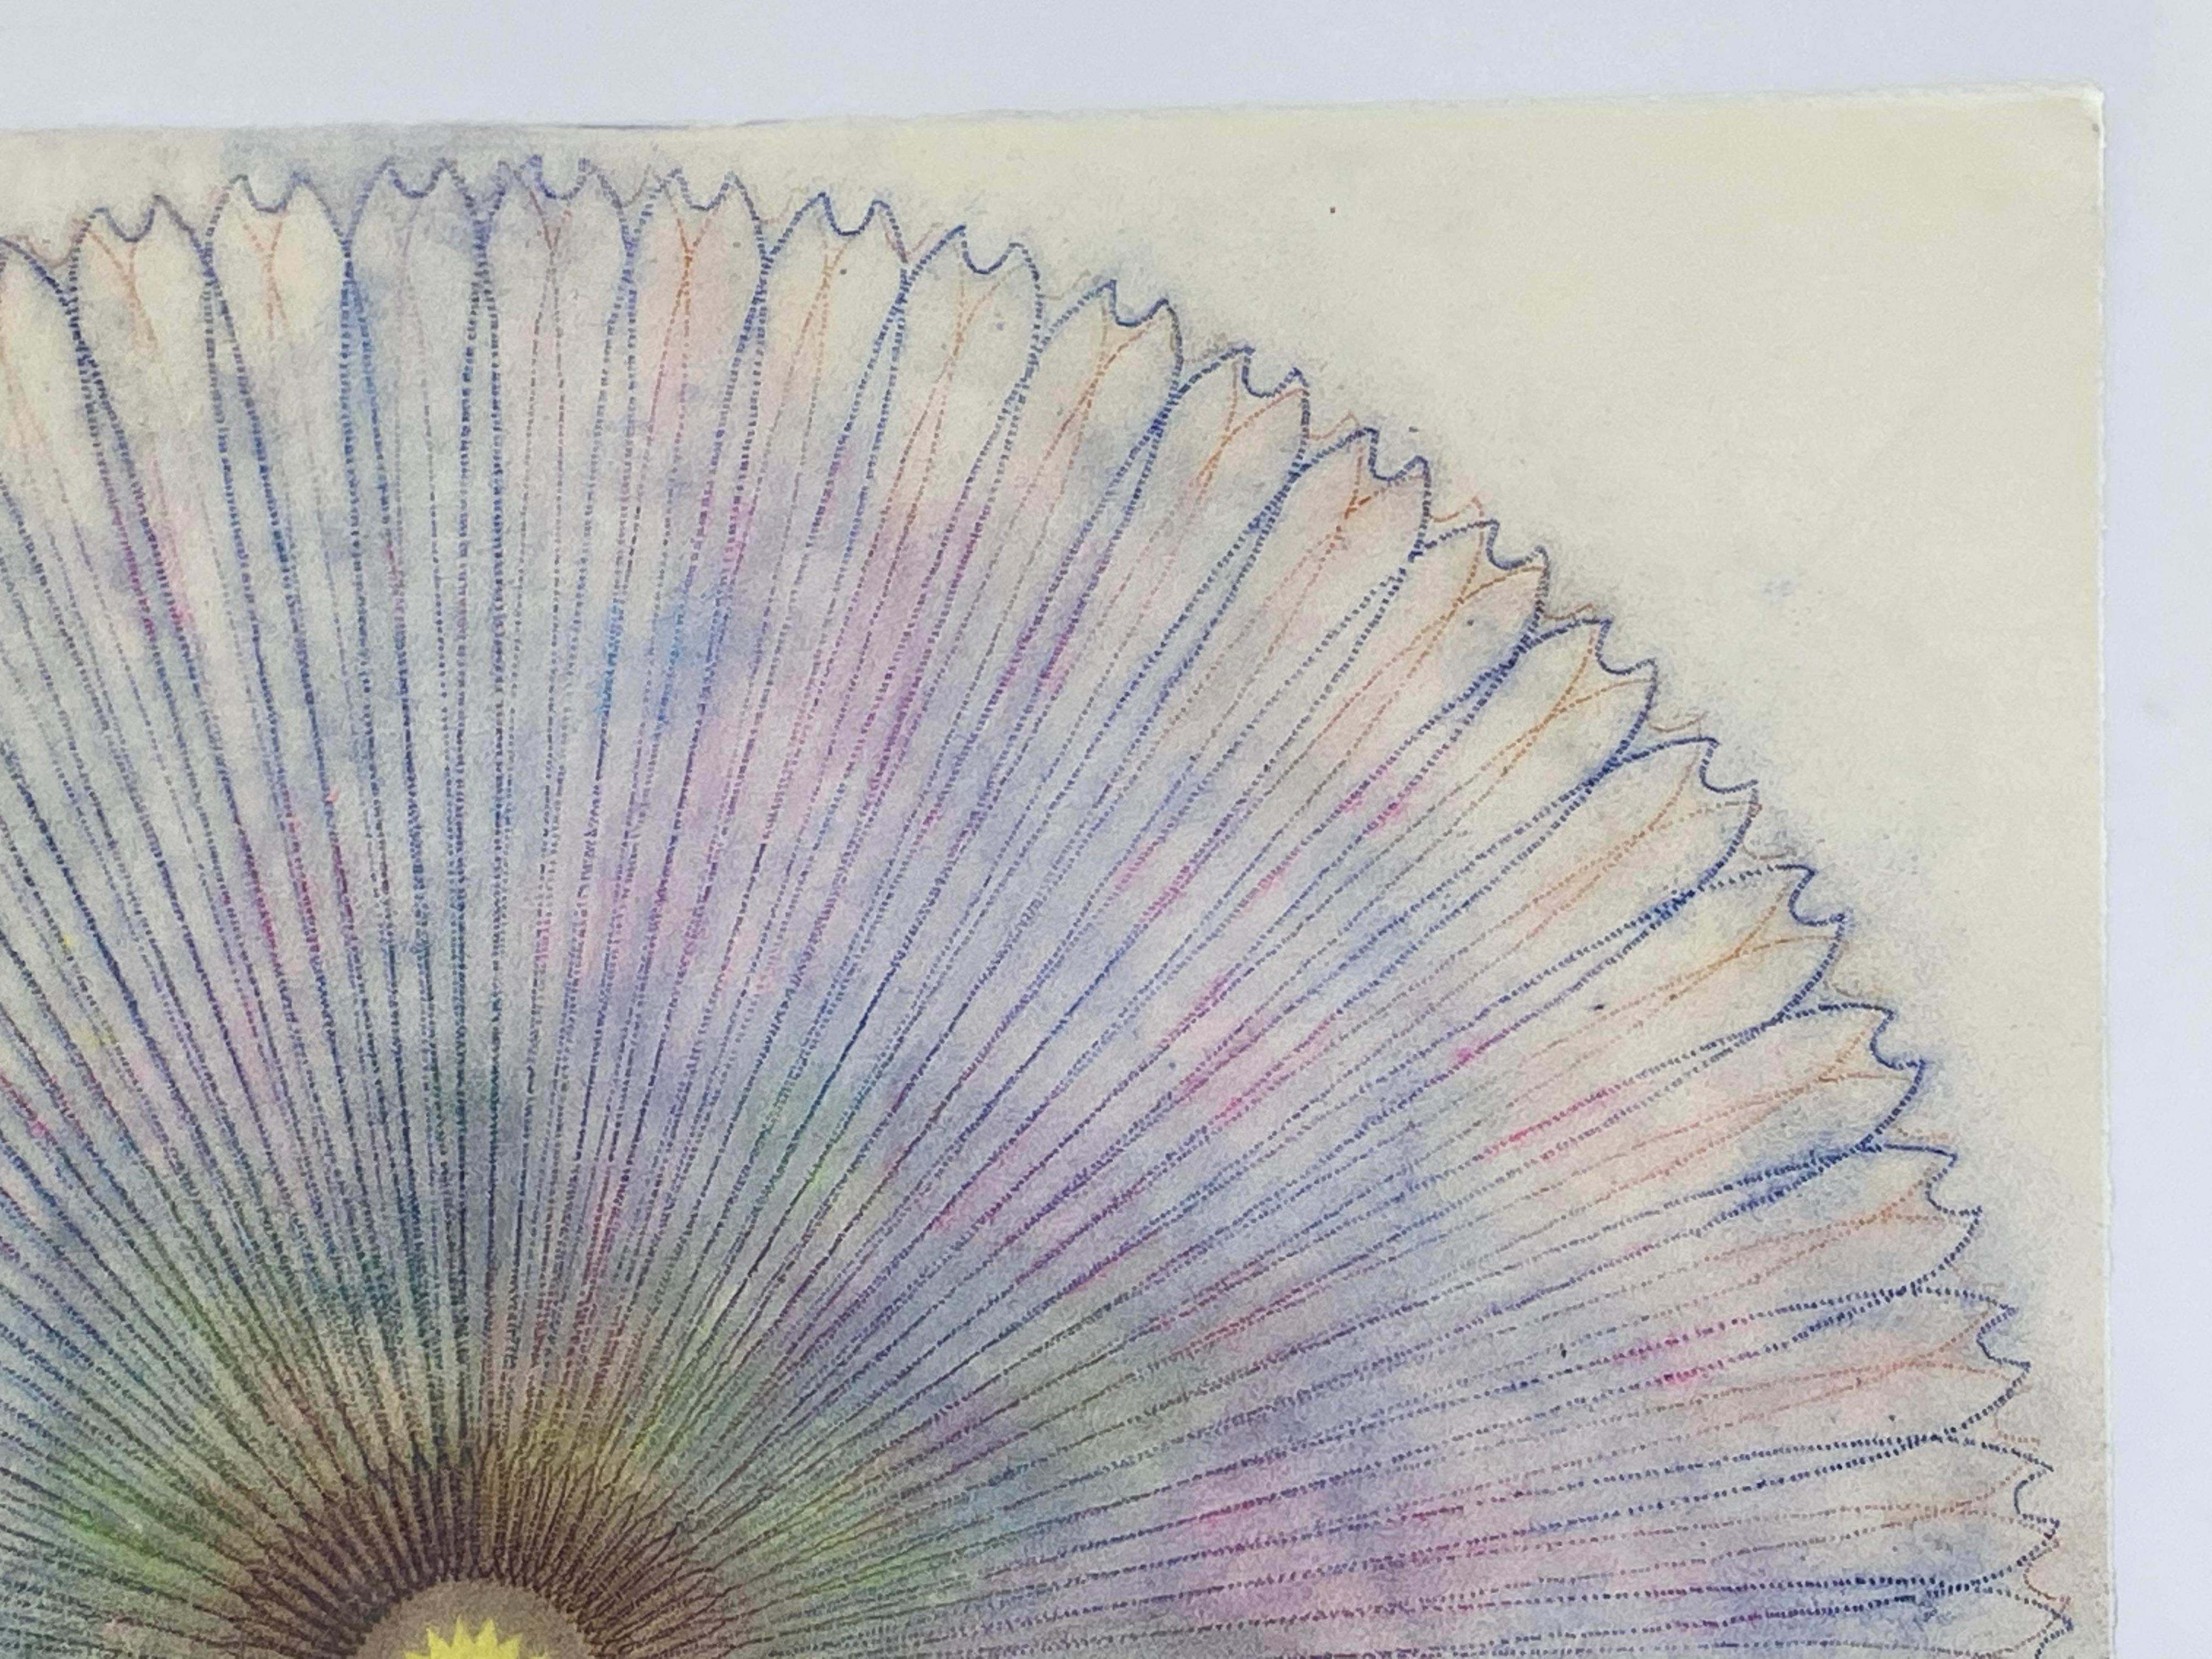 This multicolored drawing has a beautiful, soft mottled texture created with Judge's unique powered pigment technique. Primavera Pop 23 is a predominantly violet purple geometric flower mandala shape in delicate lines creating an intricately layered